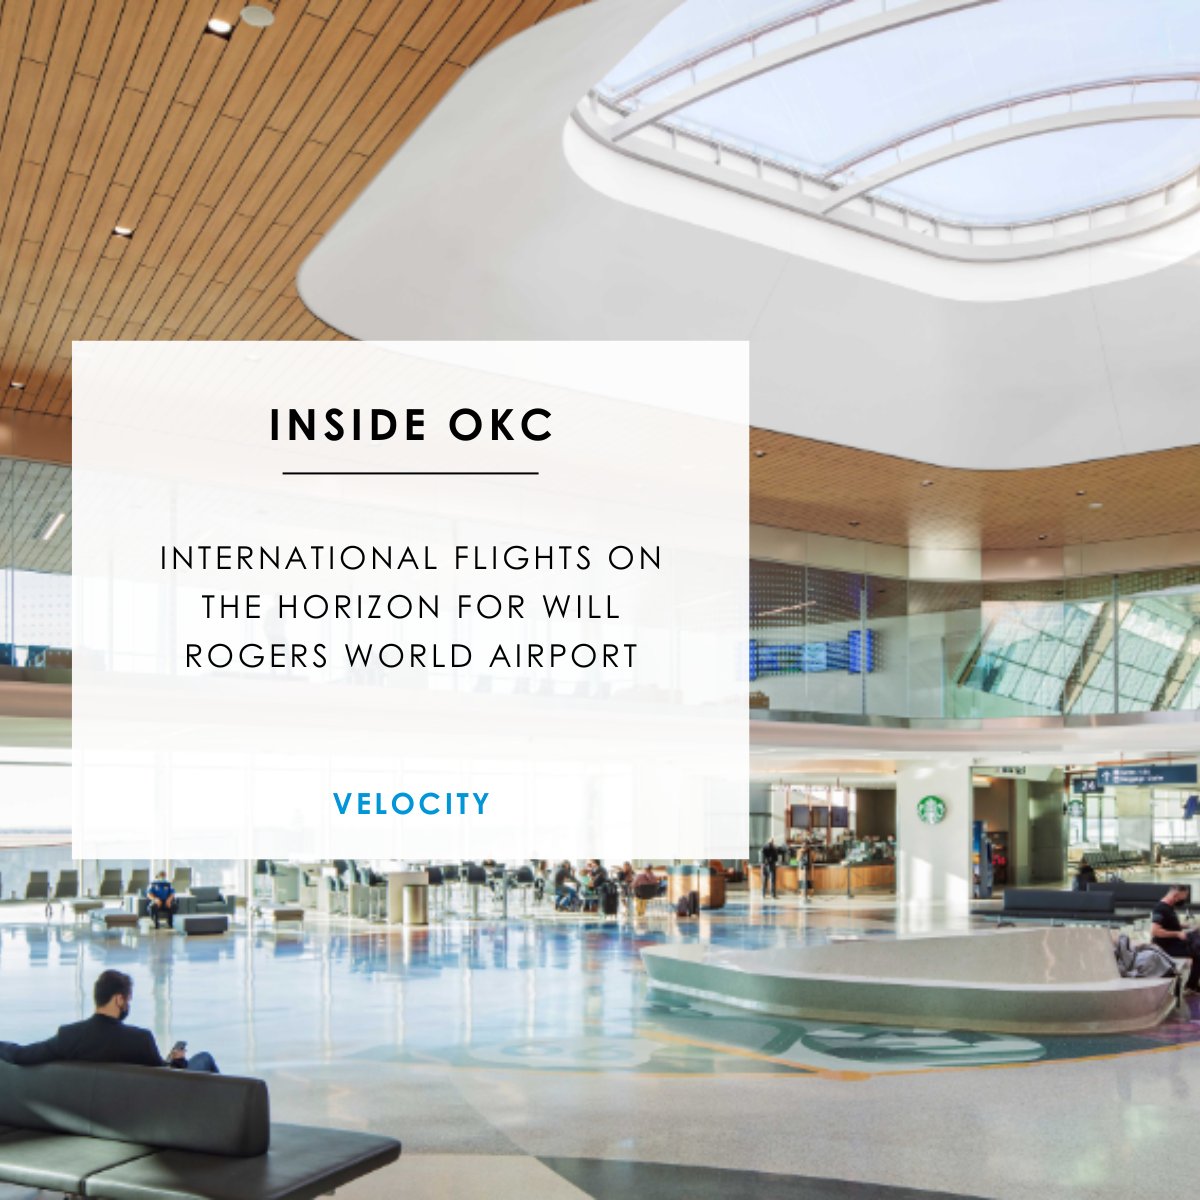 Exciting news for travelers! Will Rogers World Airport is on track to offer direct international flights, making it easier than ever to explore the world from our OKC. 🌍✈️ Find out the details: bit.ly/4bS4wK5